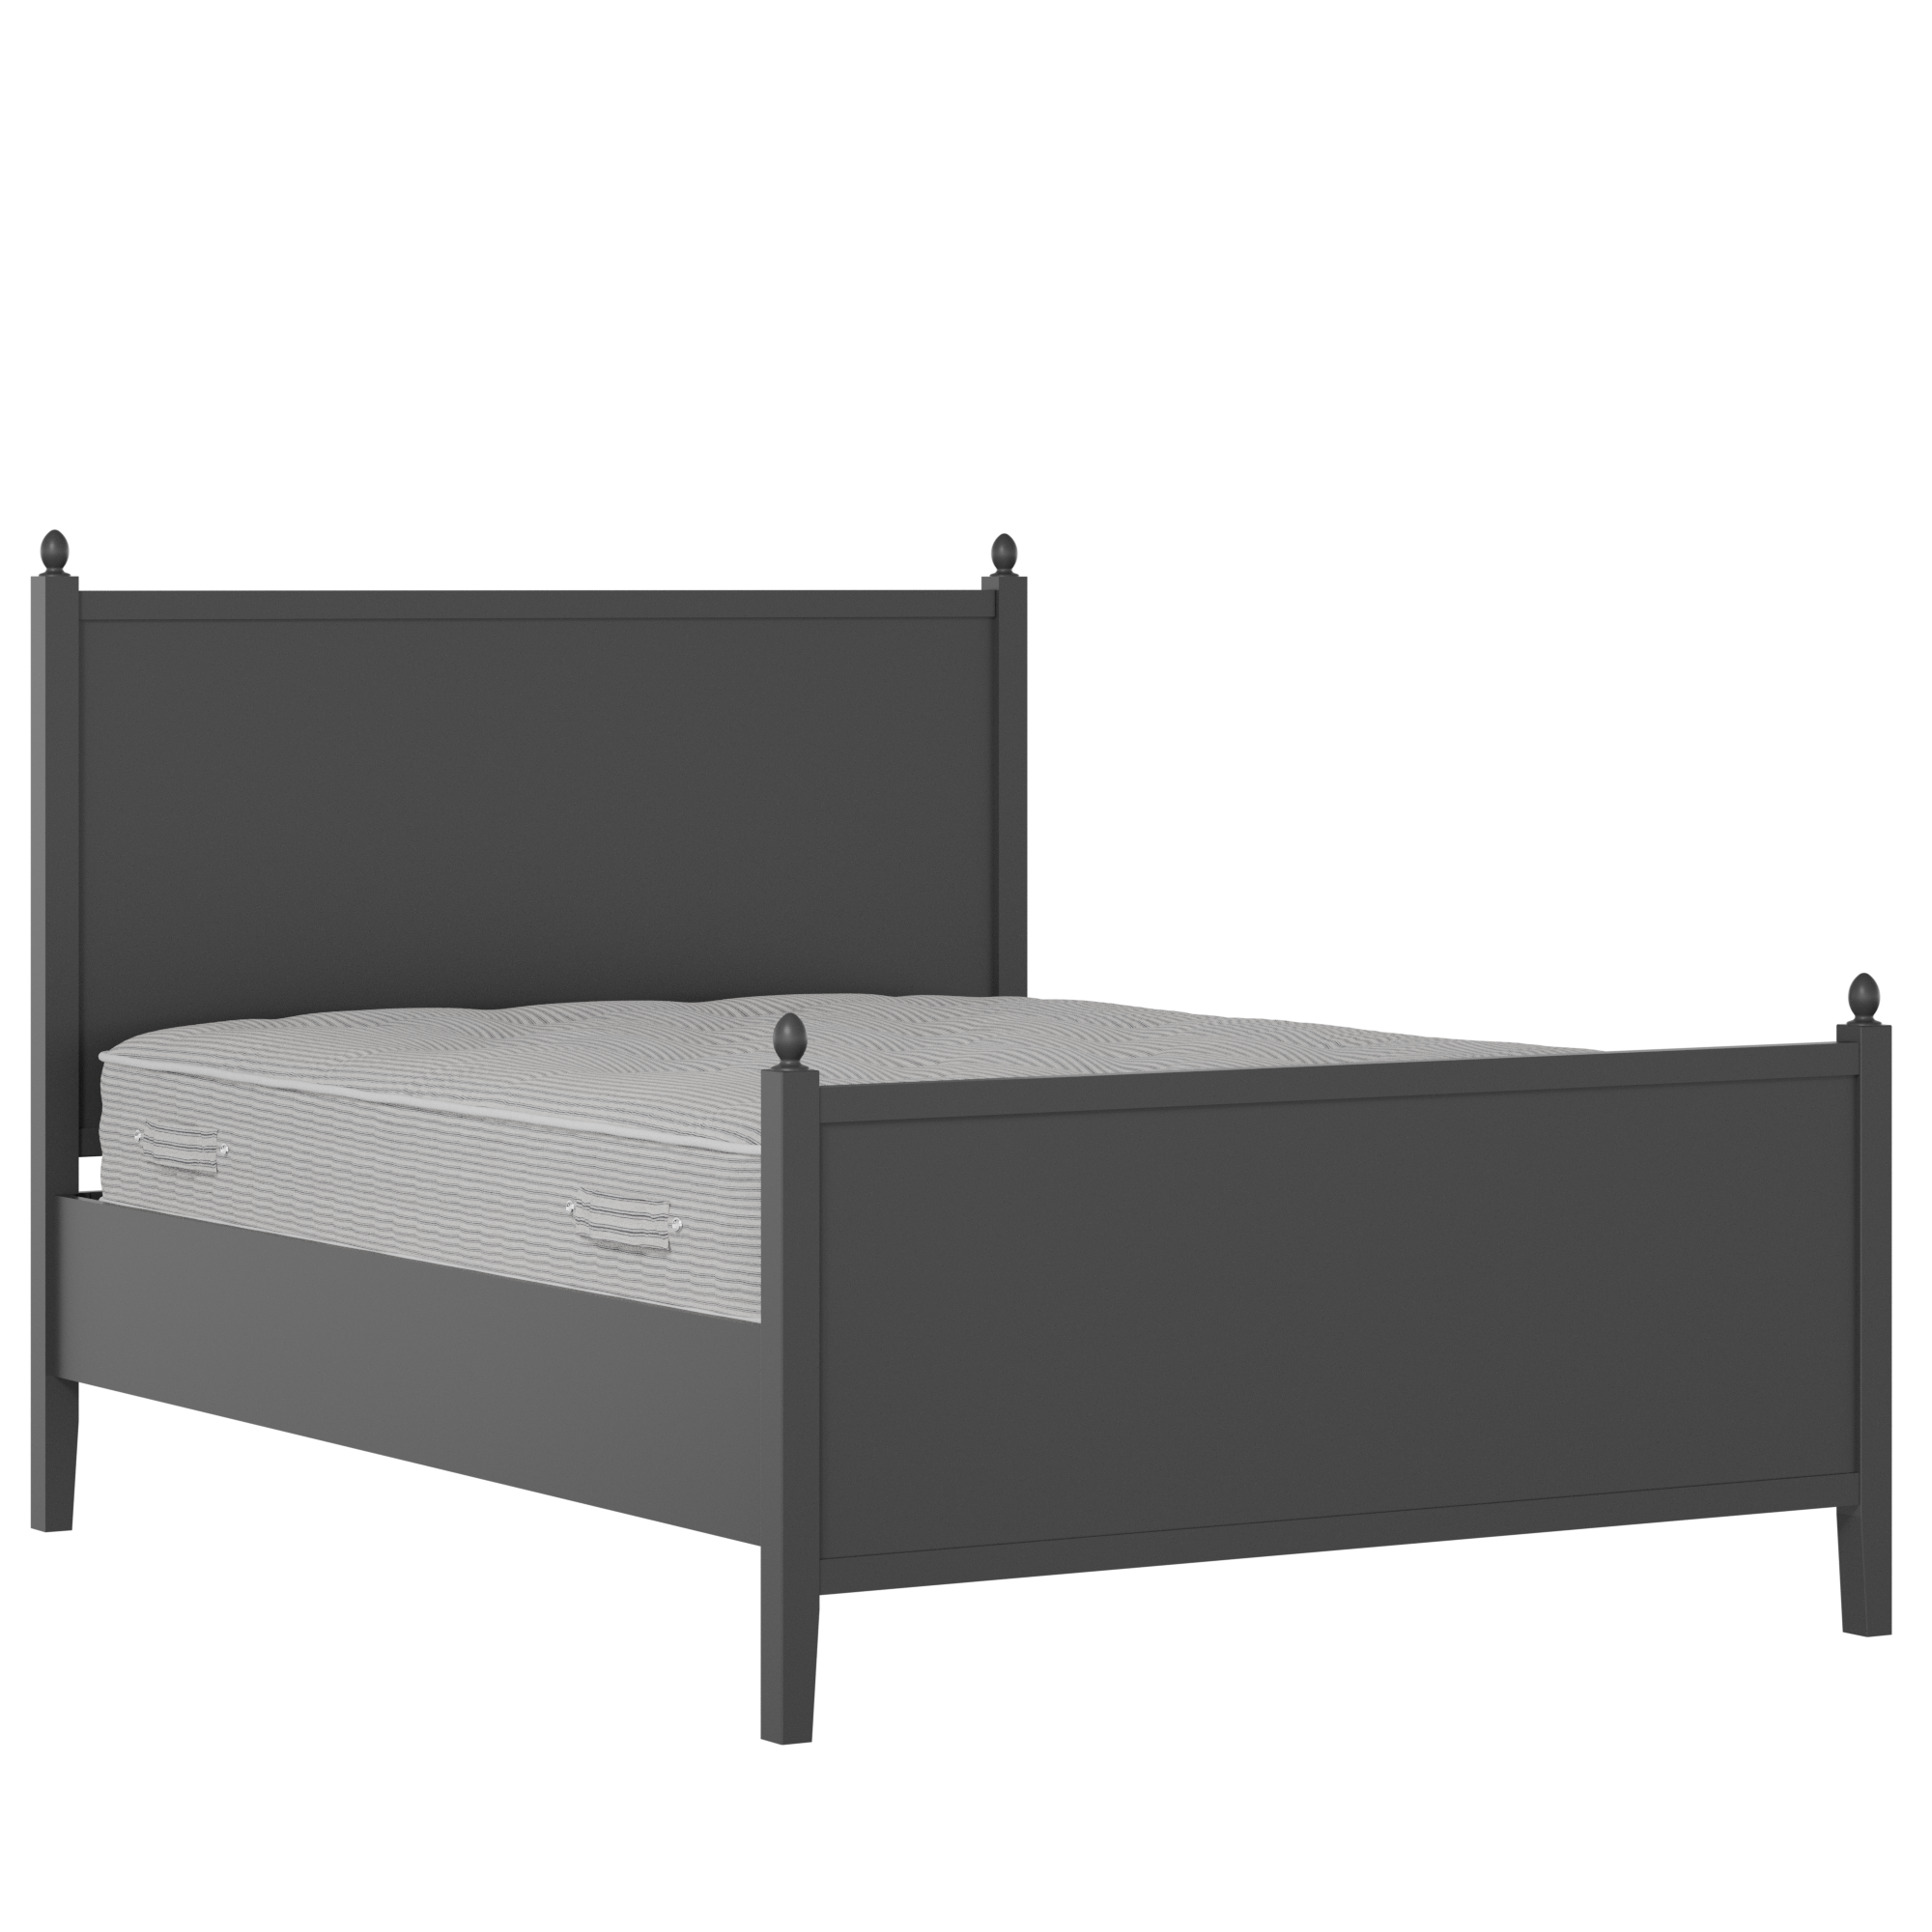 Marbella Painted painted wood bed in black with Juno mattress